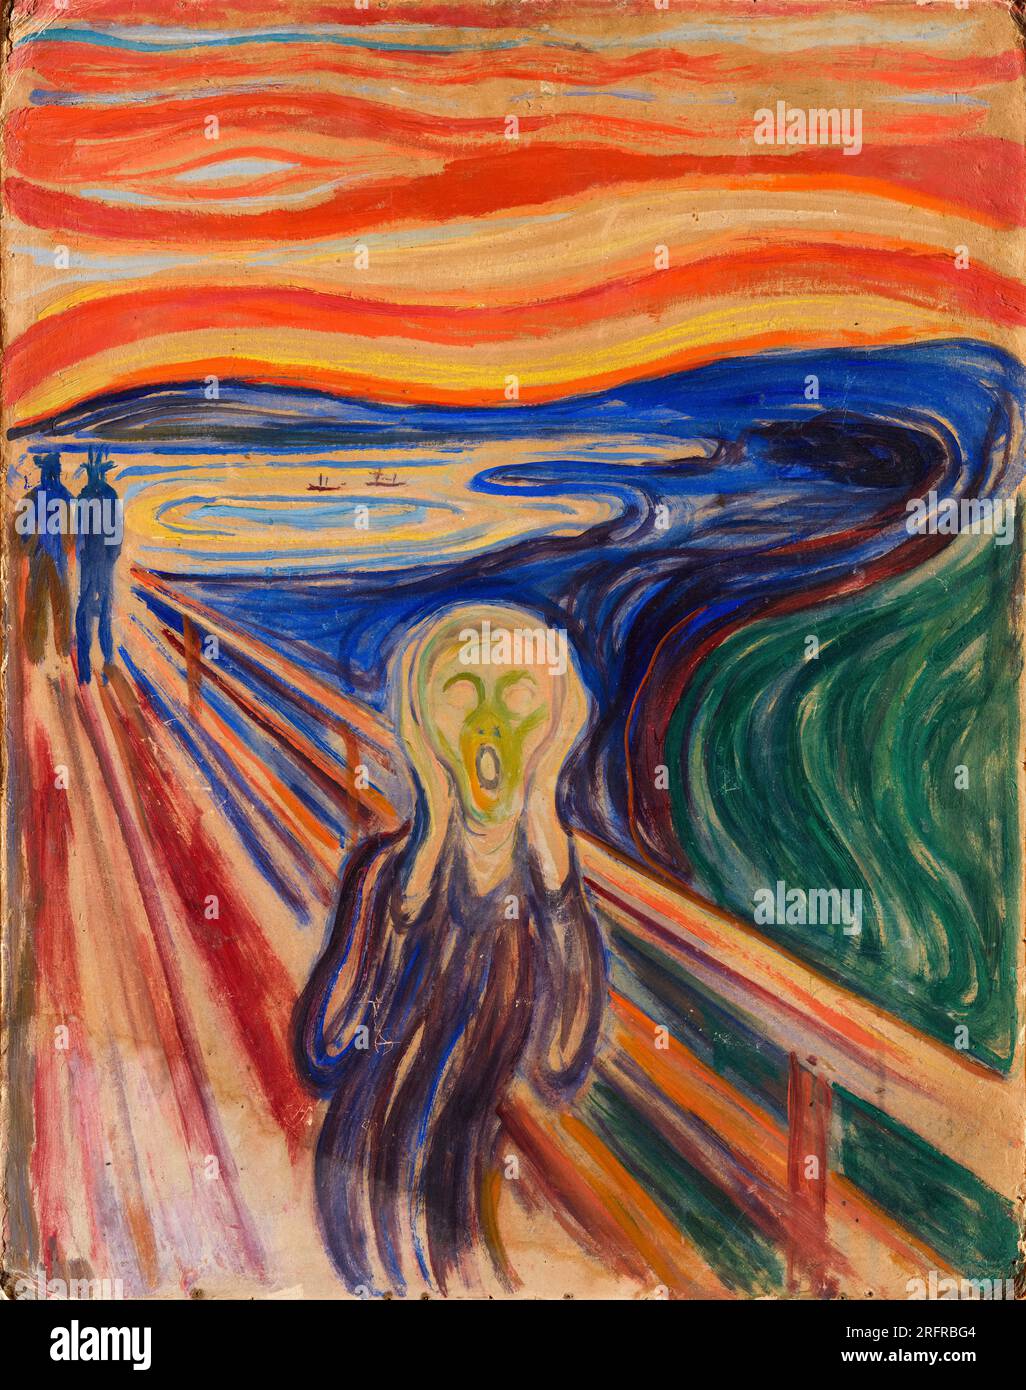 The Scream, Edvard Munch. Painting in tempera and oil on cardboard, 1910 Stock Photo